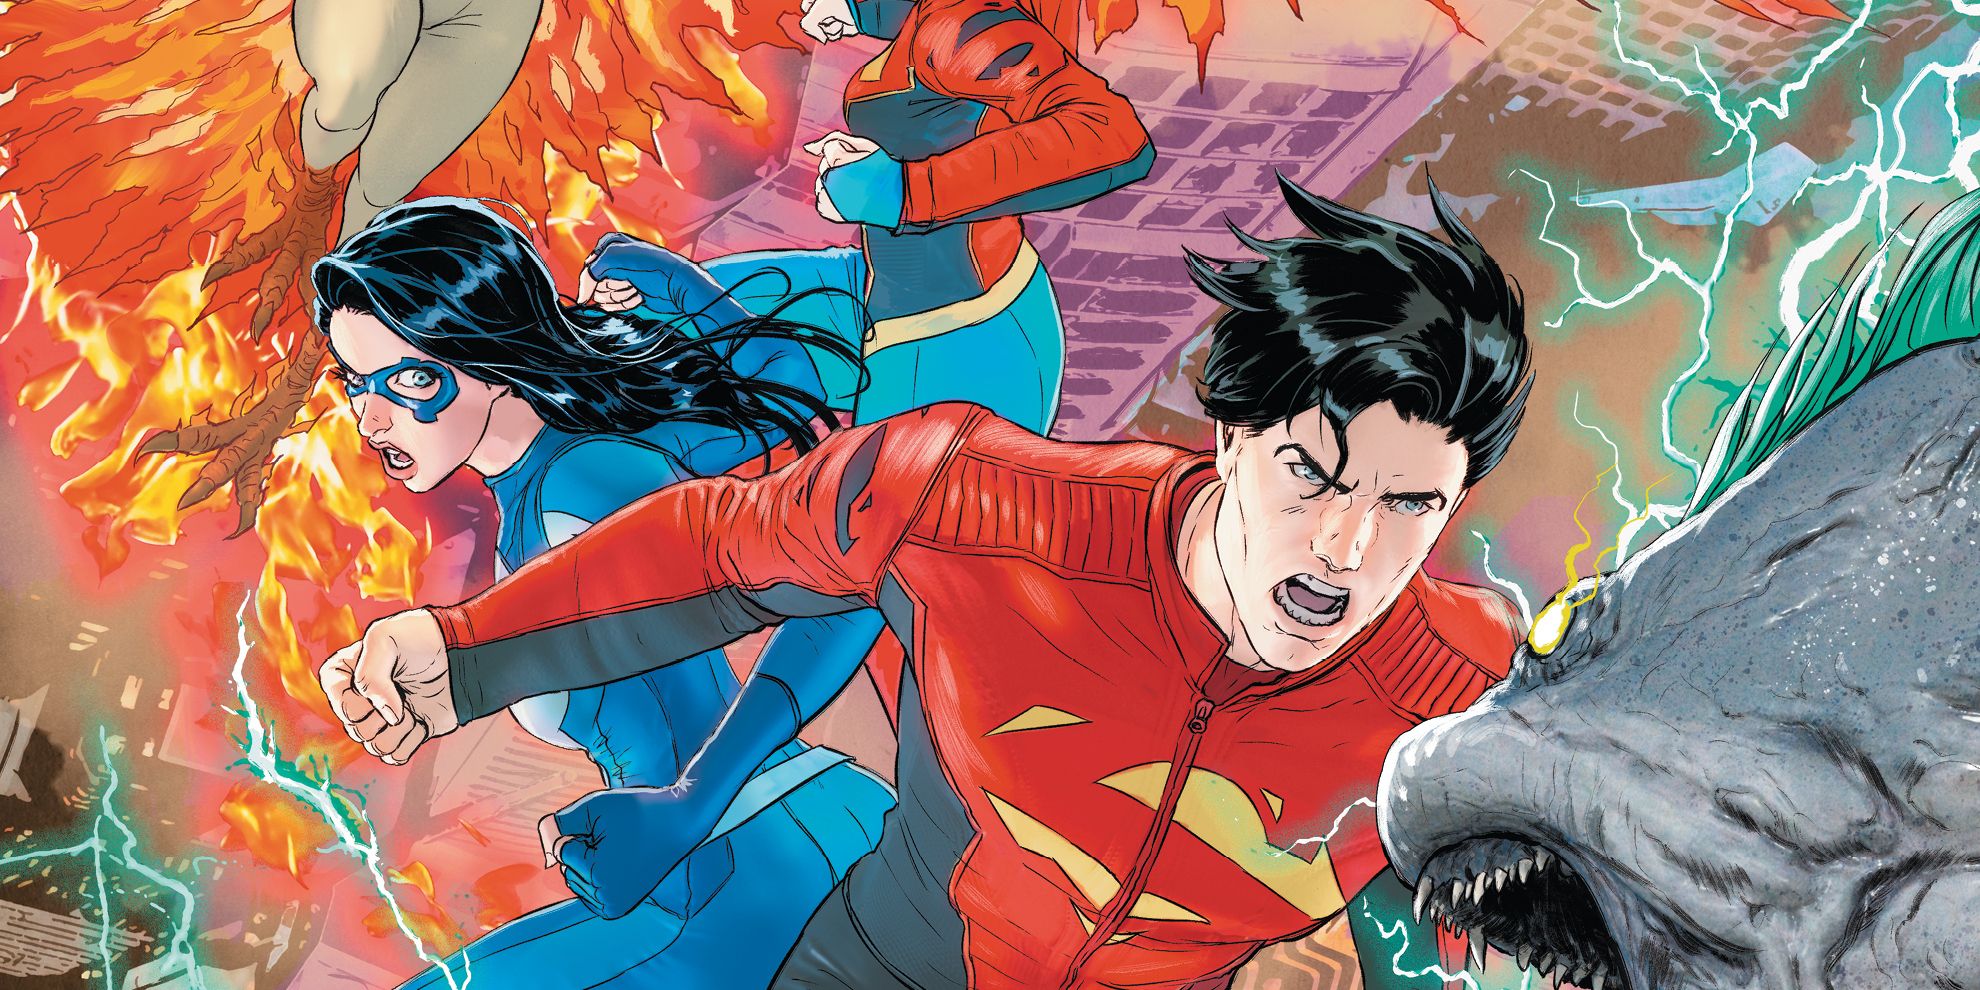 Dreamer, Supergirl, and Jon Kent join forces